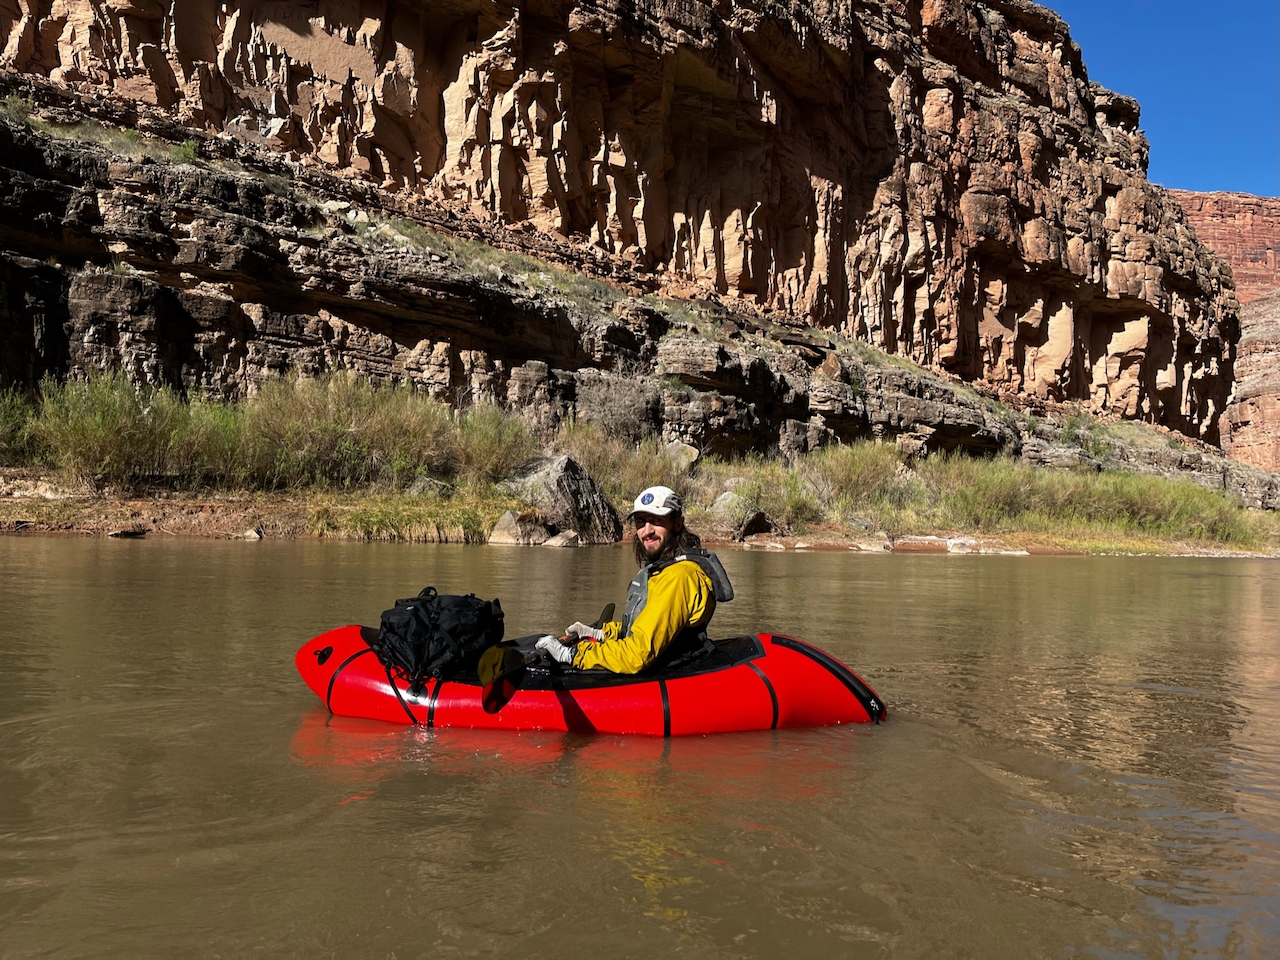 Red packraft on river.